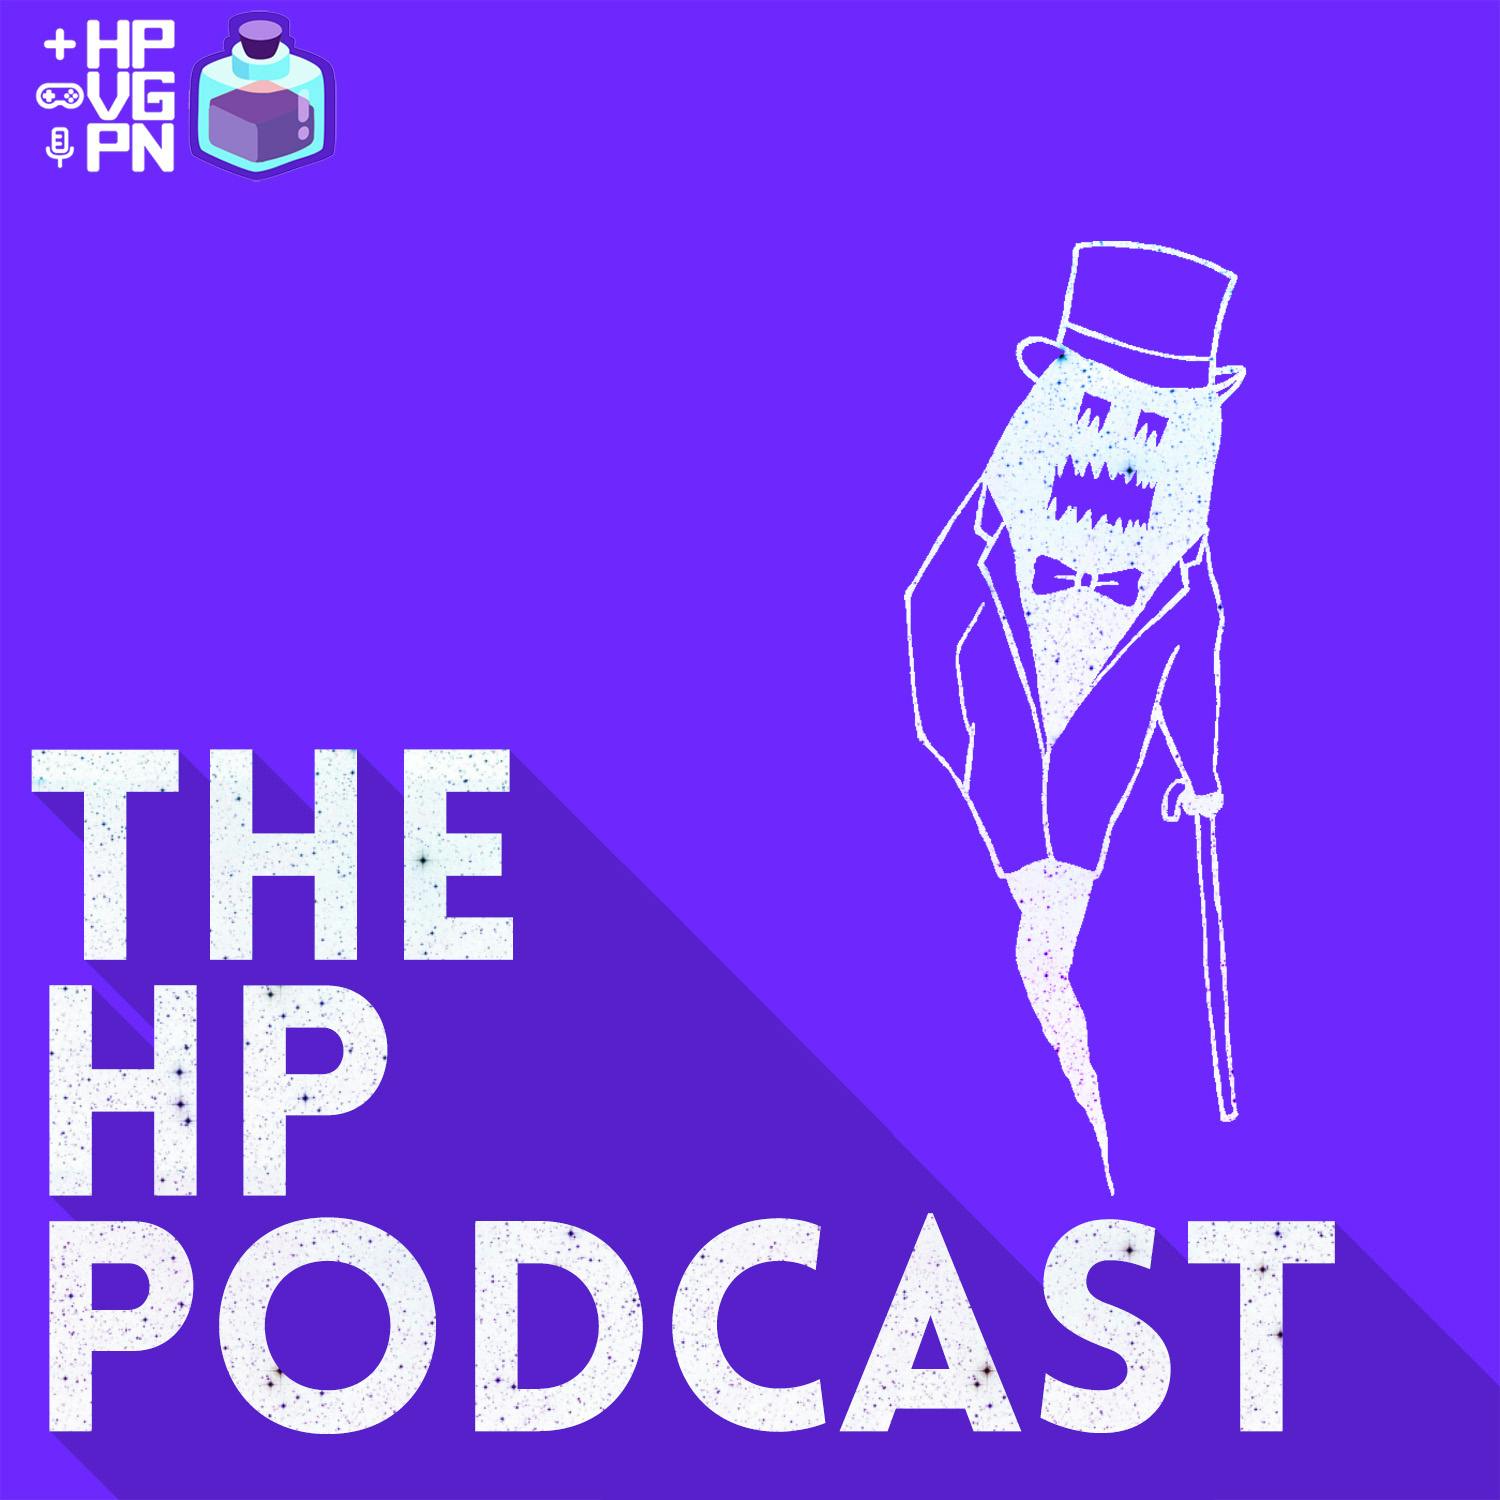 Amazon Enters the Streaming Biz - The HP Podcast Episode #89